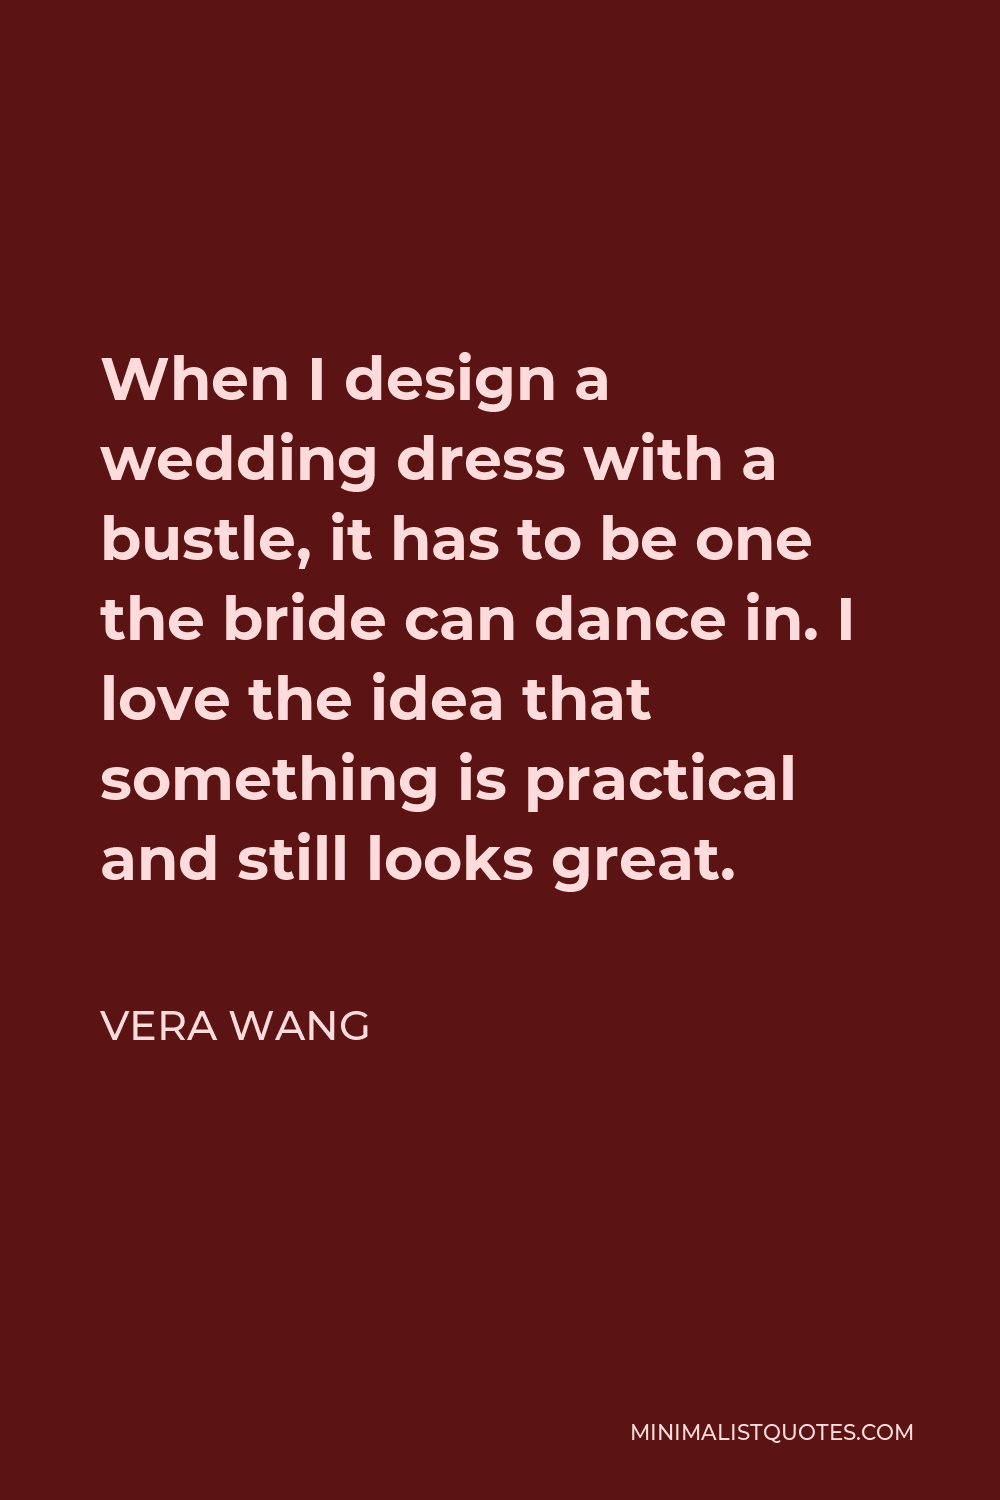 Vera Wang Quote - When I design a wedding dress with a bustle, it has to be one the bride can dance in. I love the idea that something is practical and still looks great.